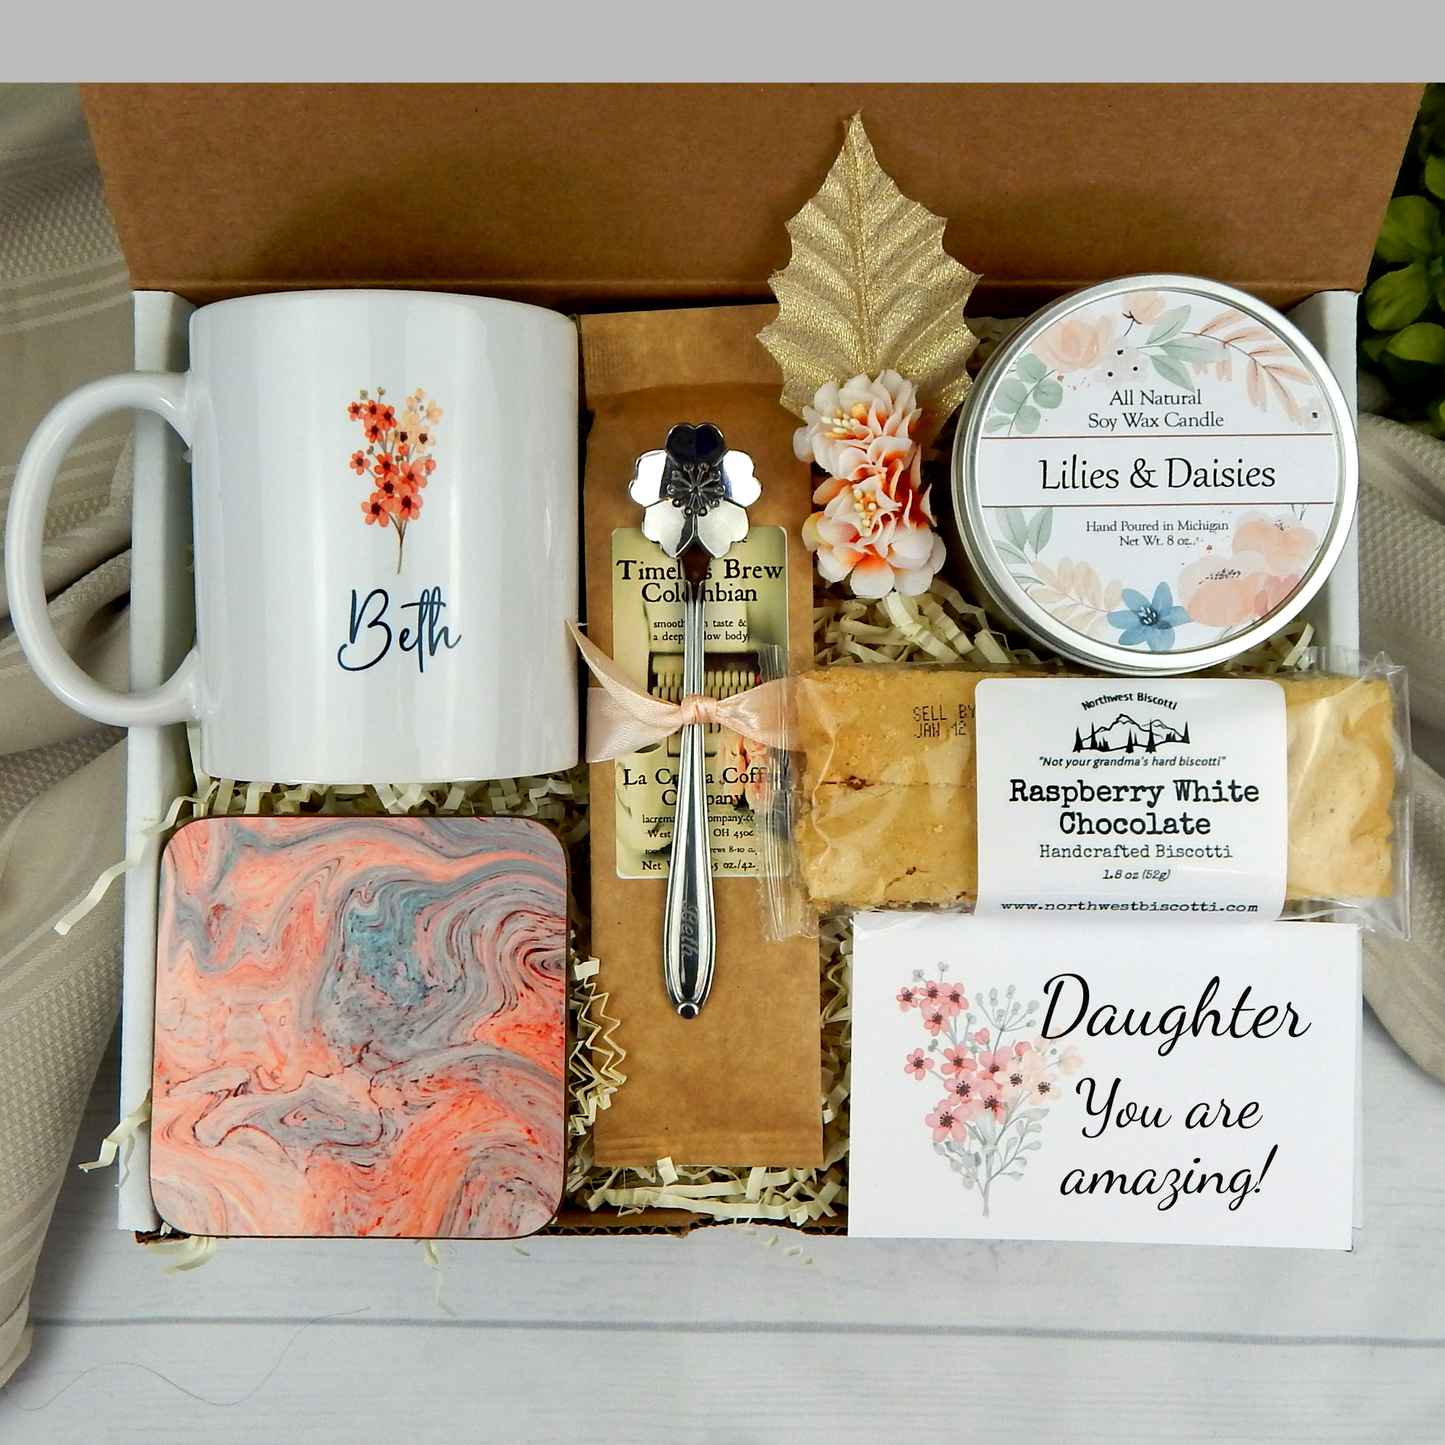 Thoughtful care package for your daughter: Personalized name mug, candle, engraved spoon, biscotti, and coffee.